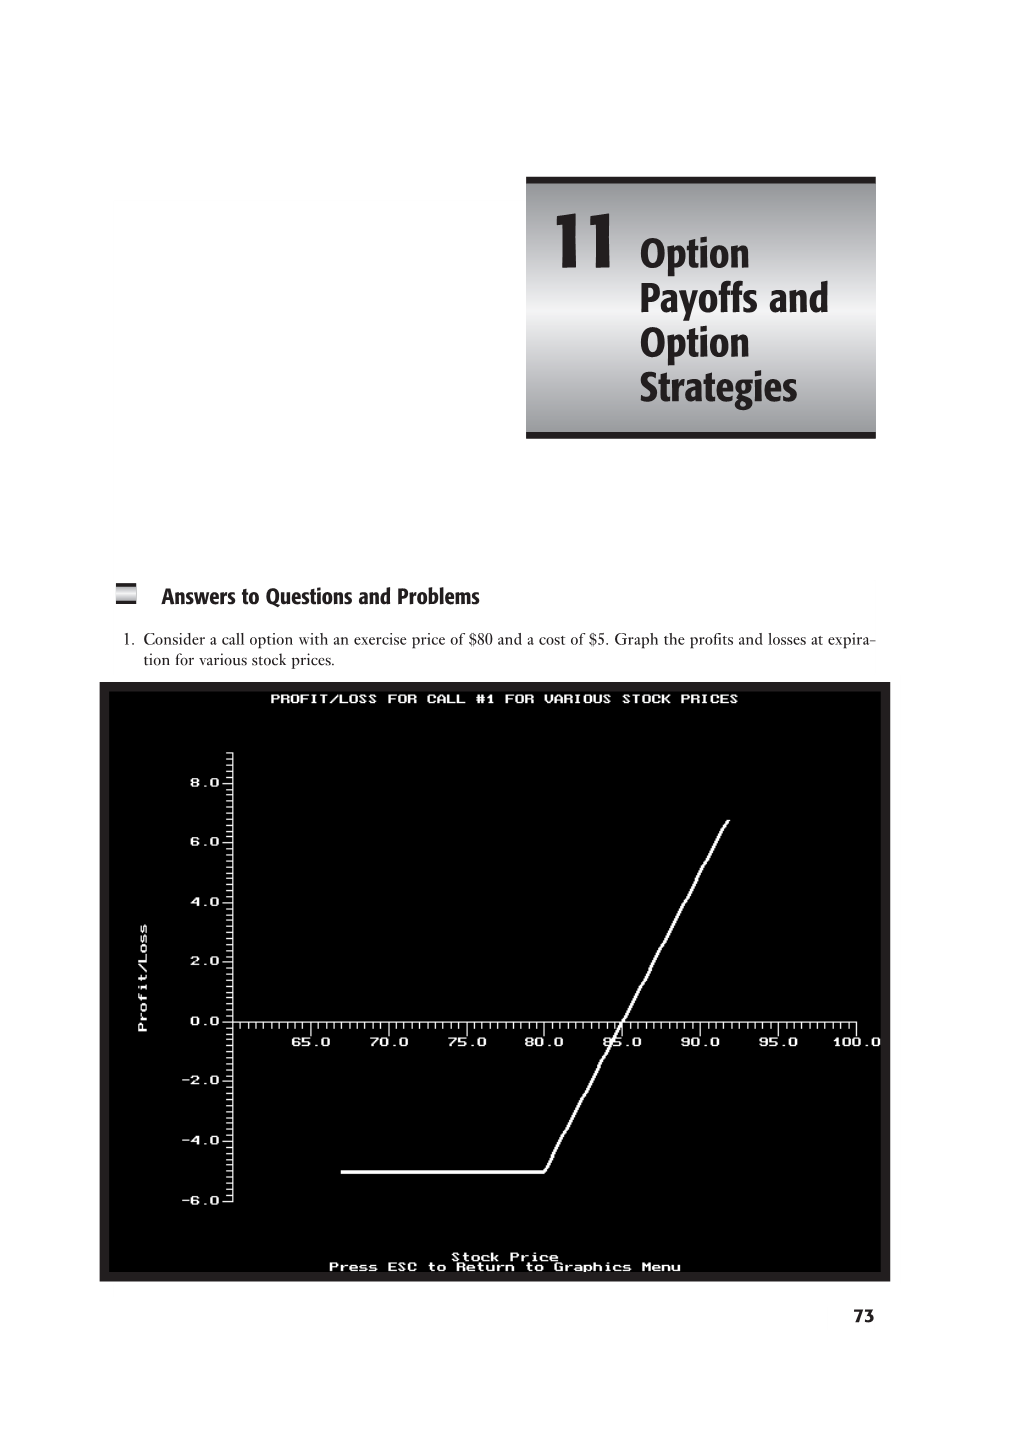 11 Option Payoffs and Option Strategies